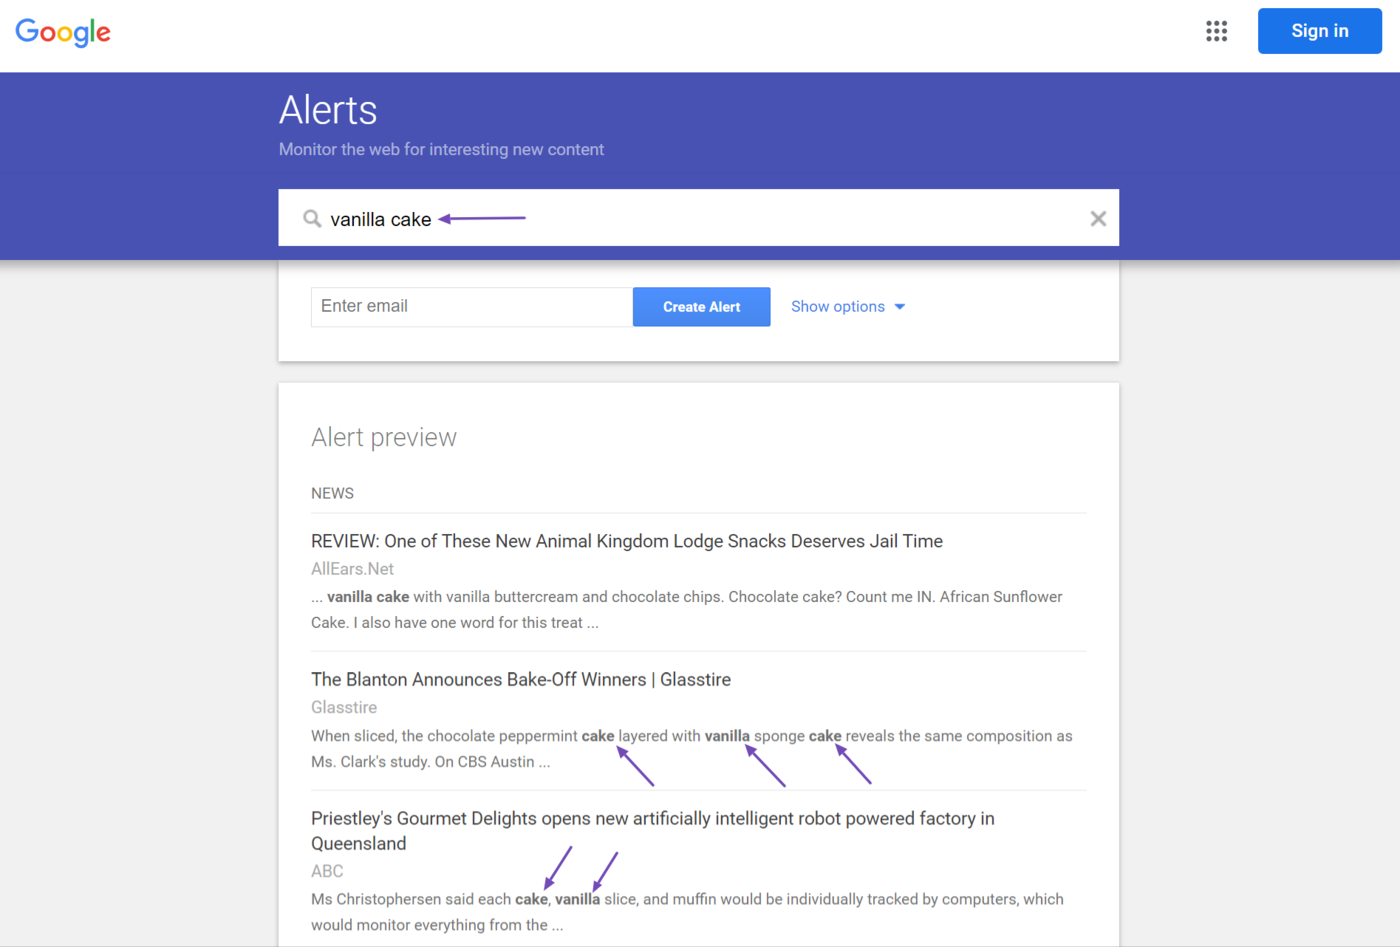 Example of a Google Alert keyword without quotes